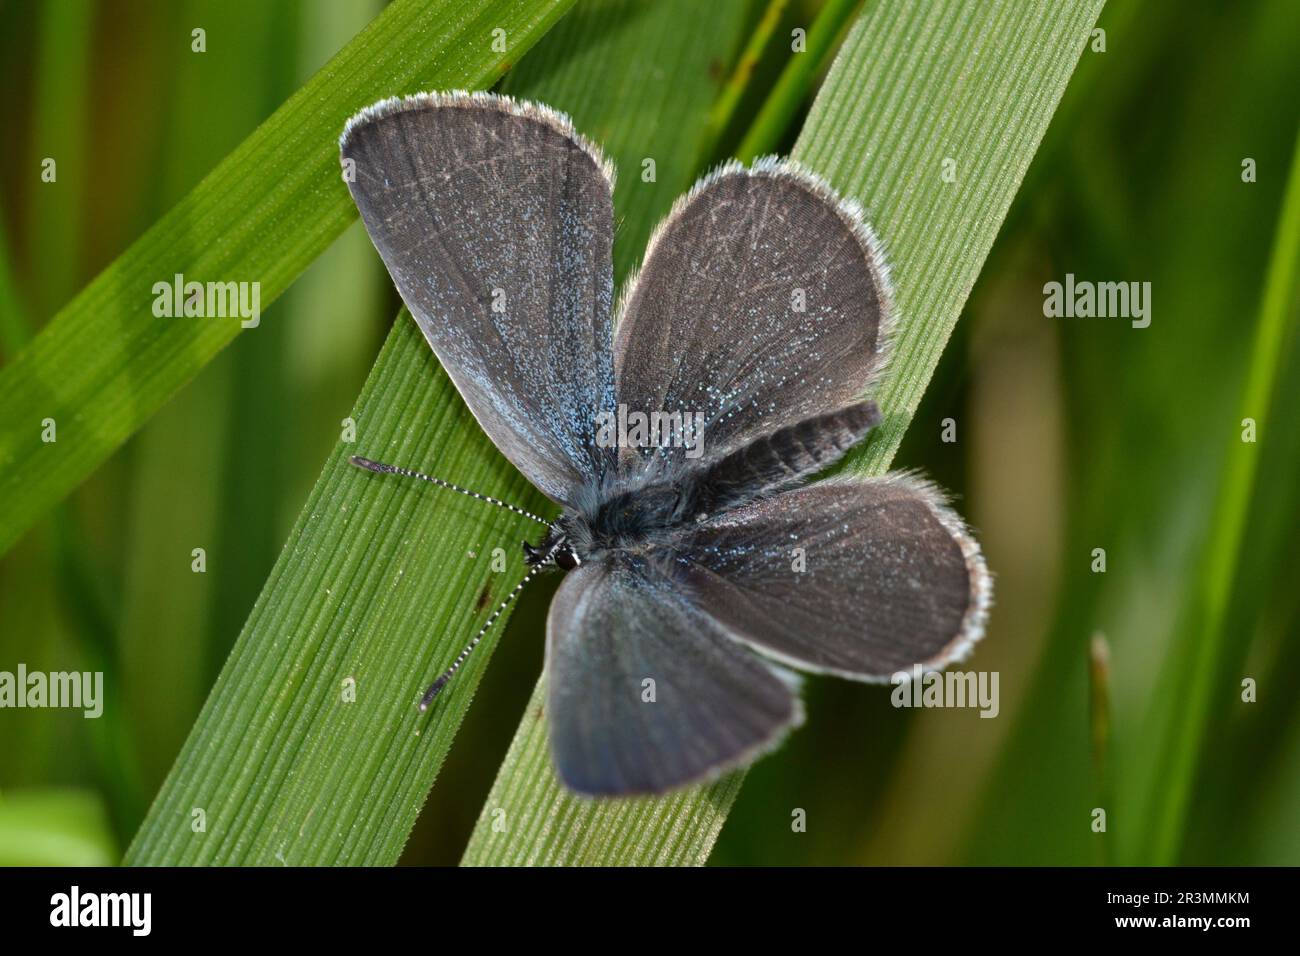 Small Blue butterfly, Ormsgill Slag Heaps, Barrow, Cumbria. A toxic soil from mining works but reclaimed as a nature reserve. Stock Photo